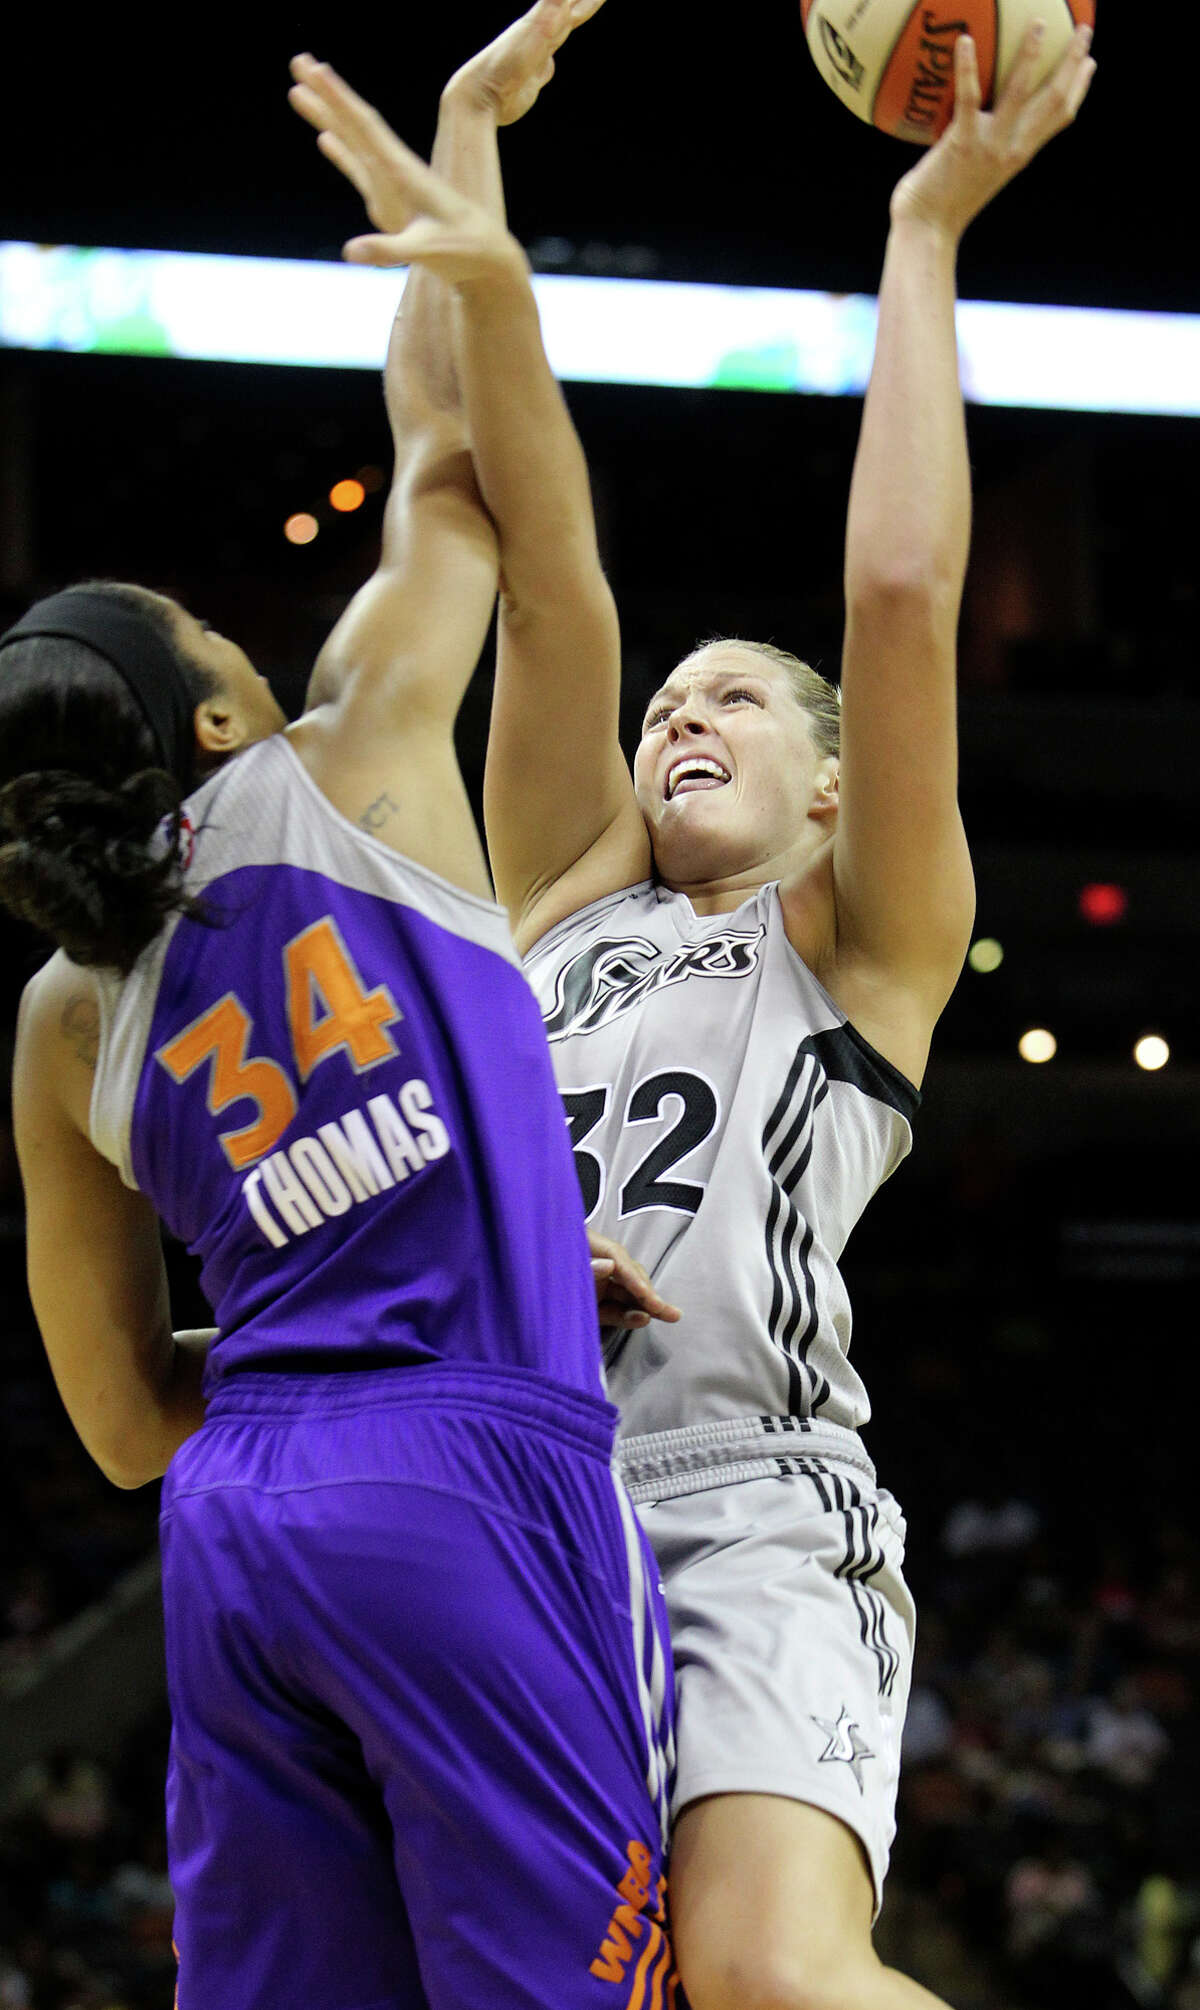 Jane Appel goes up against Krystal Thomas as the Silver Stars host the Phoenix Mercury at the AT&T Center on July 3, 2012.